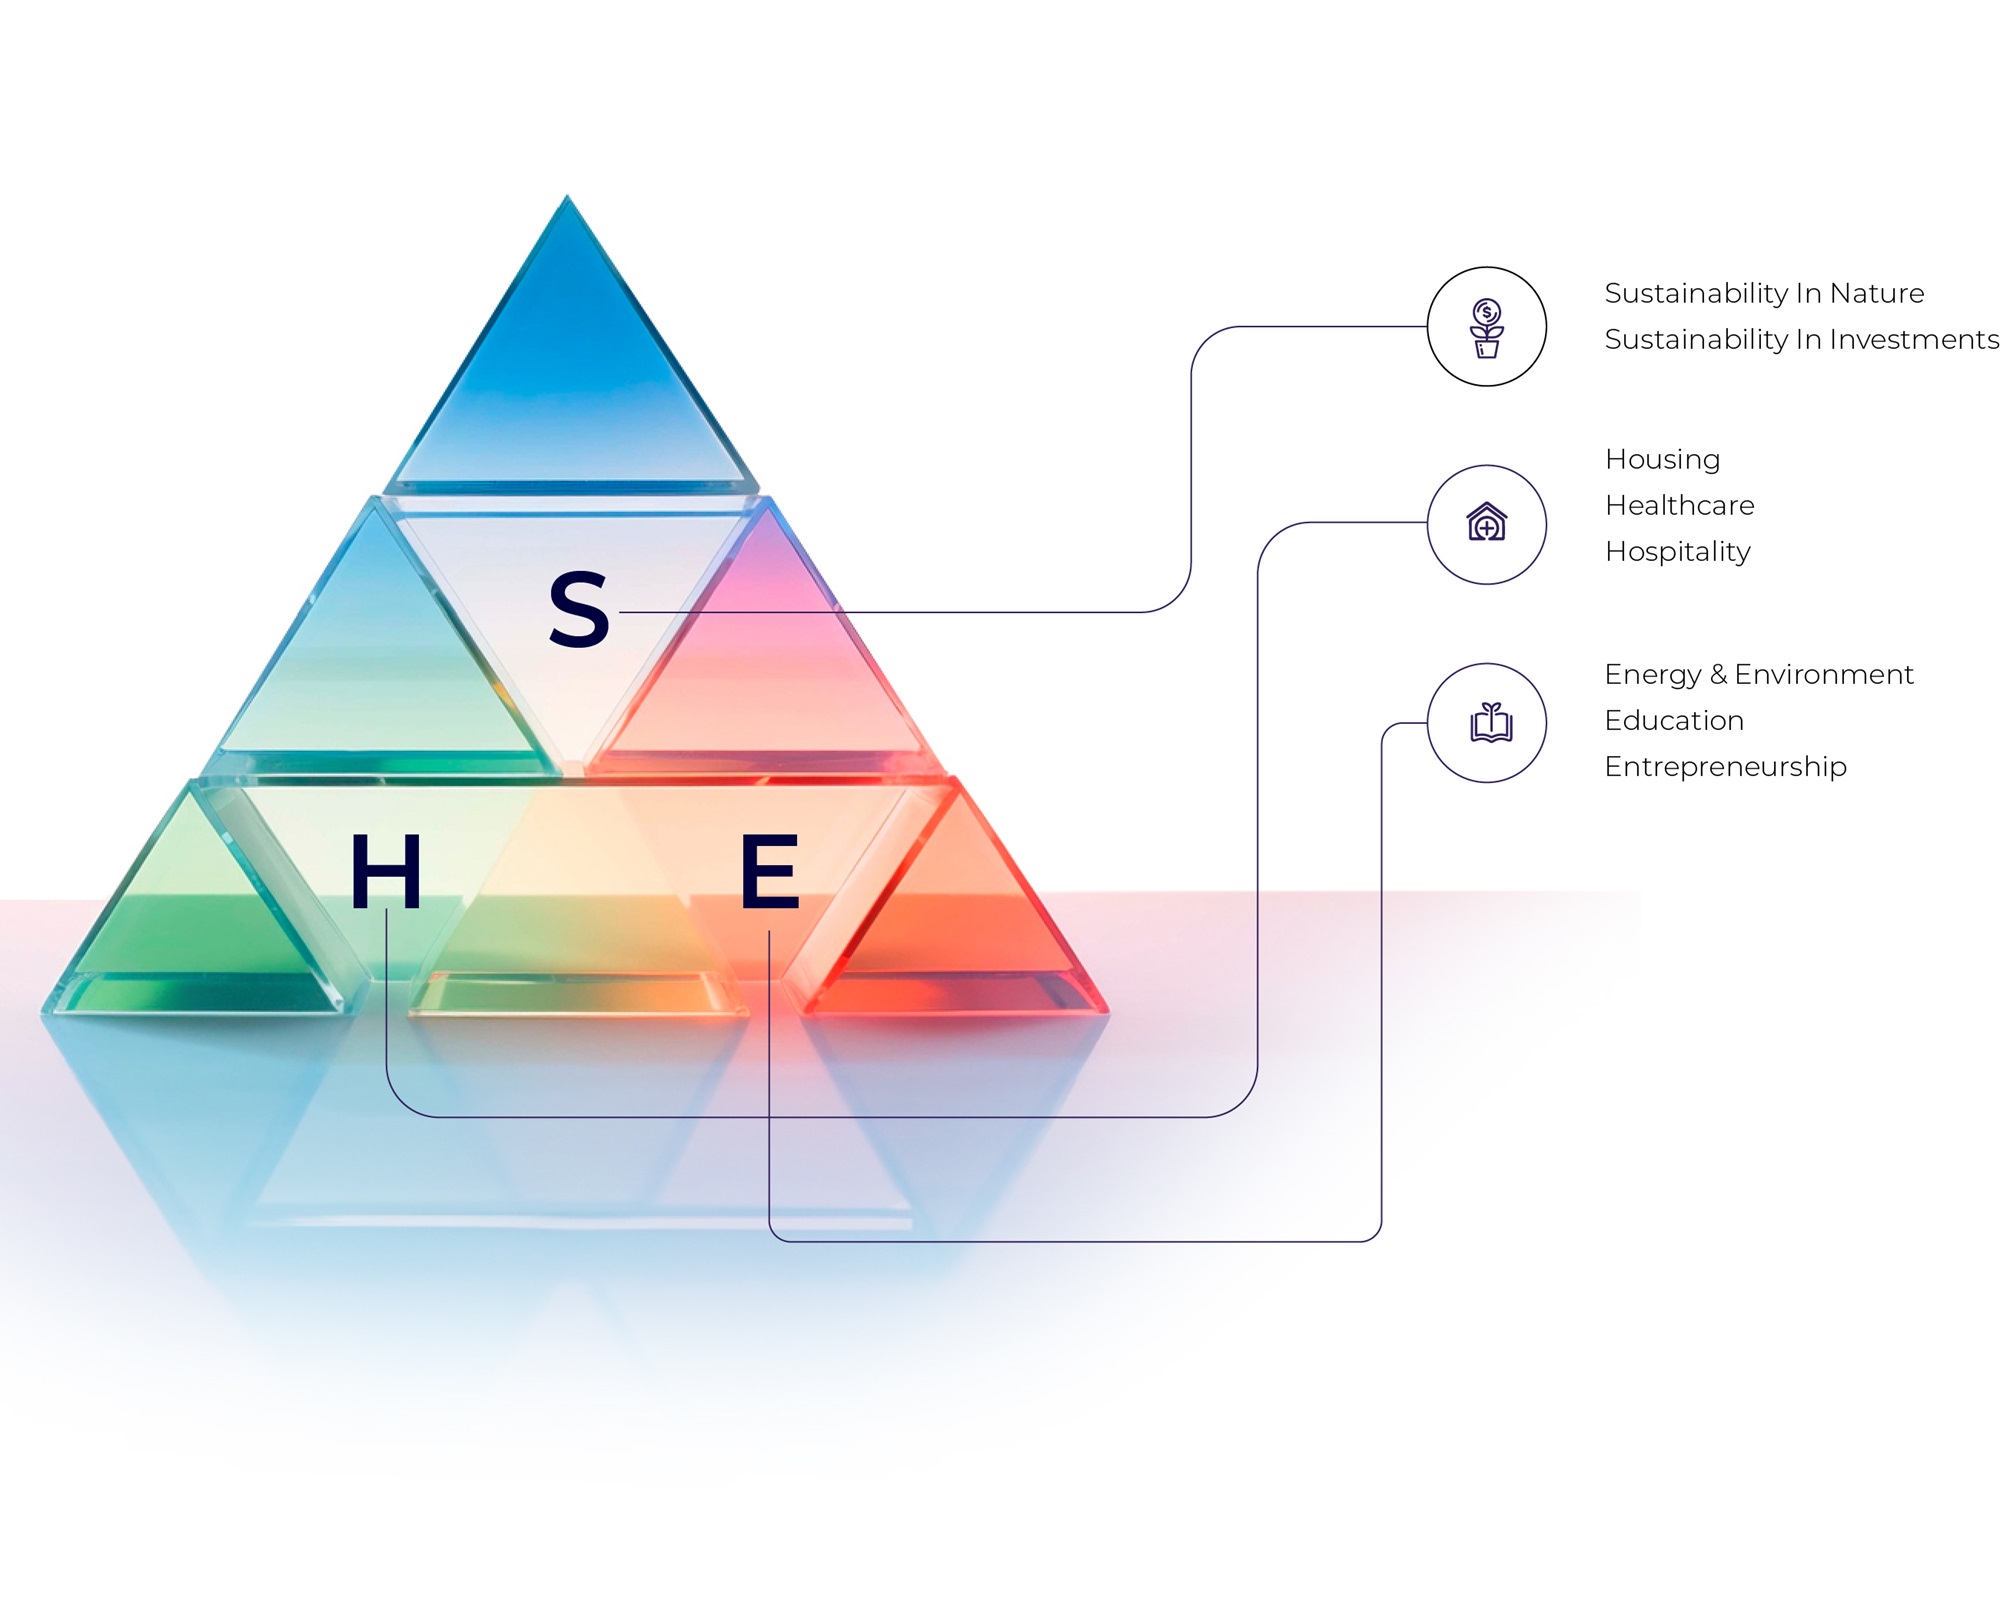 Infographic image with the meaning of SHE, where S stands for Sustainability in nature, Sustainability in investment, H stands for Housing, Healthcare, Hospitality and E stands for Energy & Environment, Education, Entrepreneurship